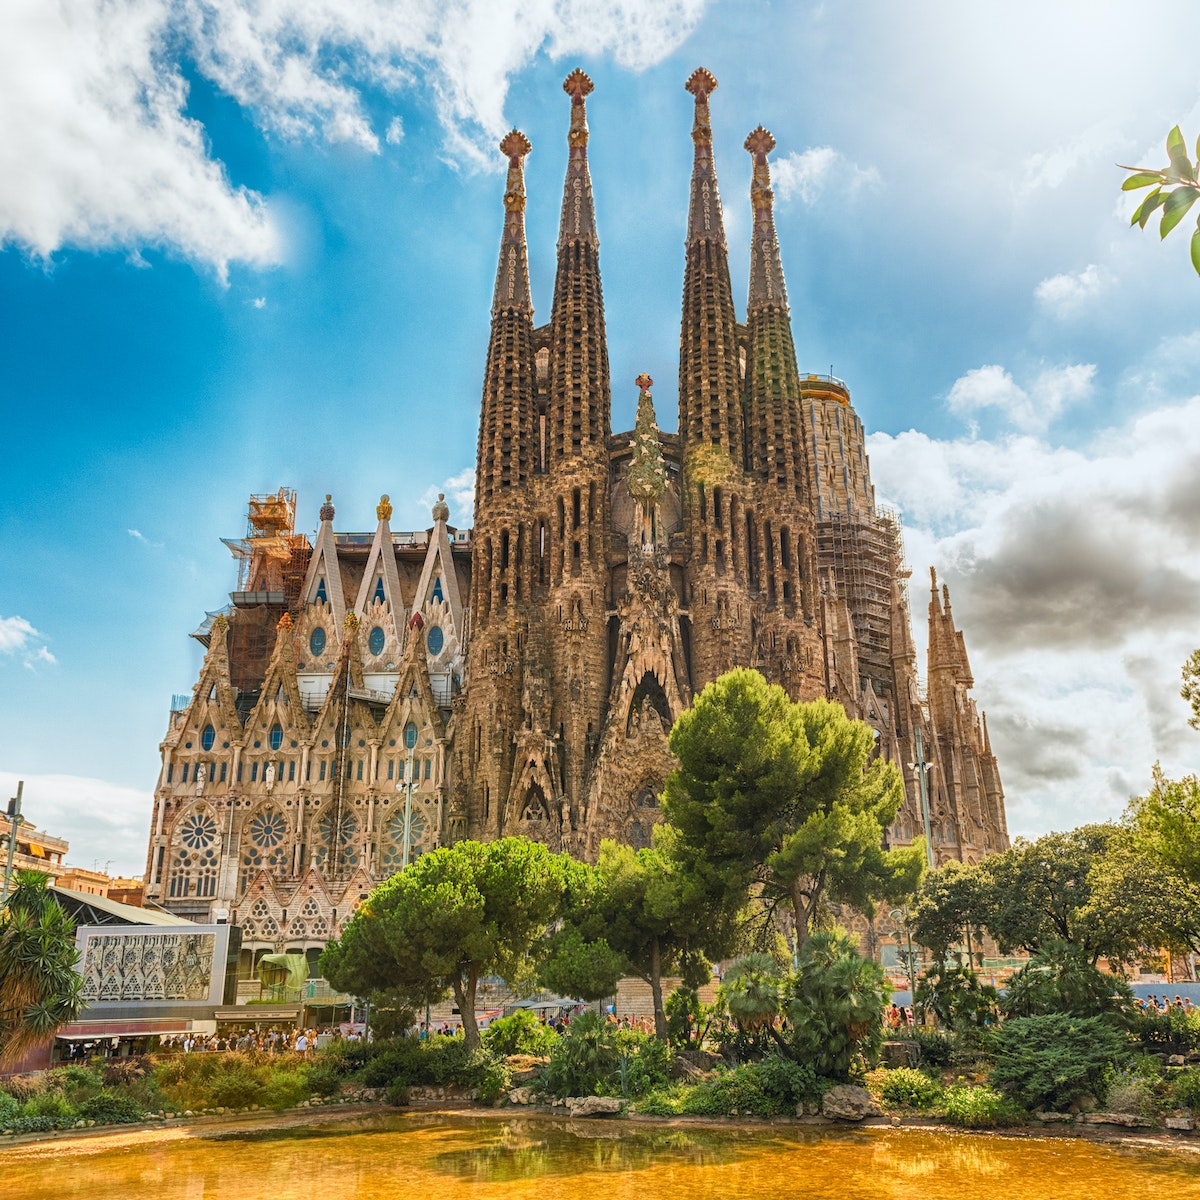 BARCELONA - AUGUST 9: View of the Sagrada Familia, iconic landmark in Barcelona, Catalonia, Spain, on August 9, 2017. Designed by Gaudi and estimated to be completed by 2028. Cranes digitally removed
756015418
antoni, antonio, architecture, art, barcelona, blue, building, catalan, catalonia, cathedral, church, city, construction, designed, editorial, europe, facade, familia, family, famous, gaudi, gothic, historical, history, la, landmark, modern, monument, pond, religion, sagrada, sky, spain, spanish, structure, summer, tall, temple, tourism, tower, town, travel